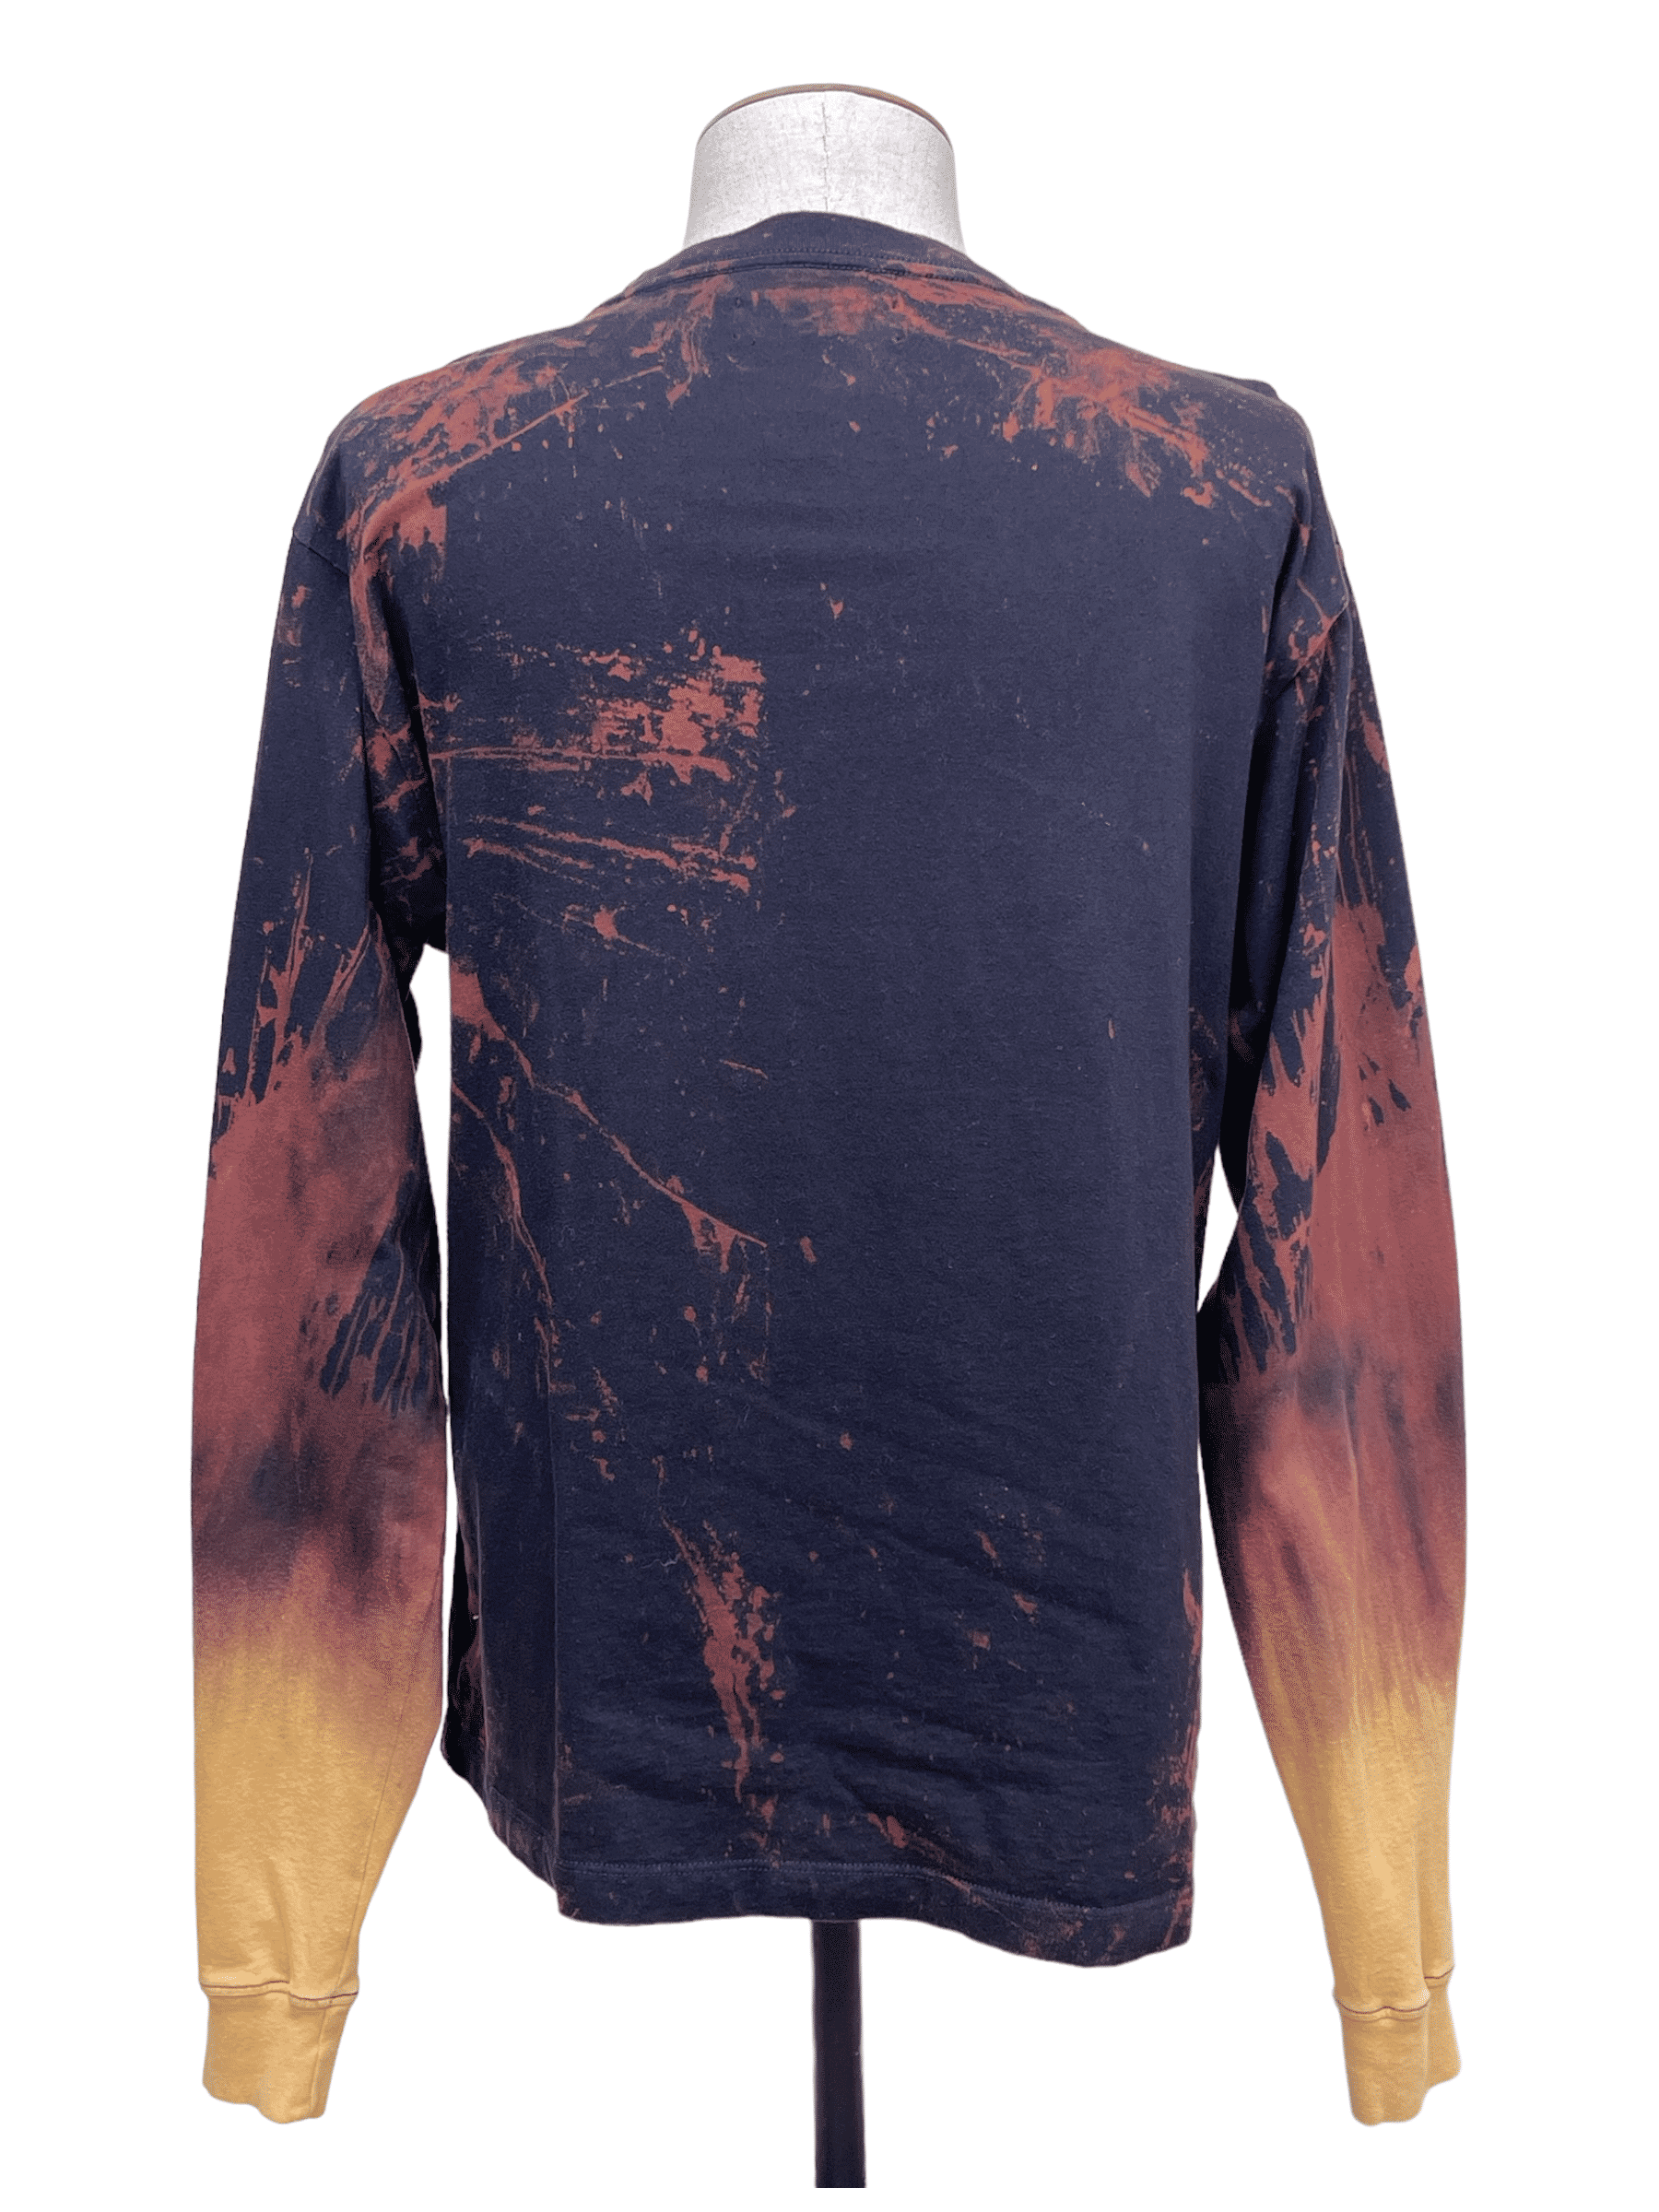 424 Black Bleach Dyed Long Sleeve T-Shirt - Genuine Design Luxury Consignment Calgary, Alberta, Canada New and Pre-Owned Clothing, Shoes, Accessories.